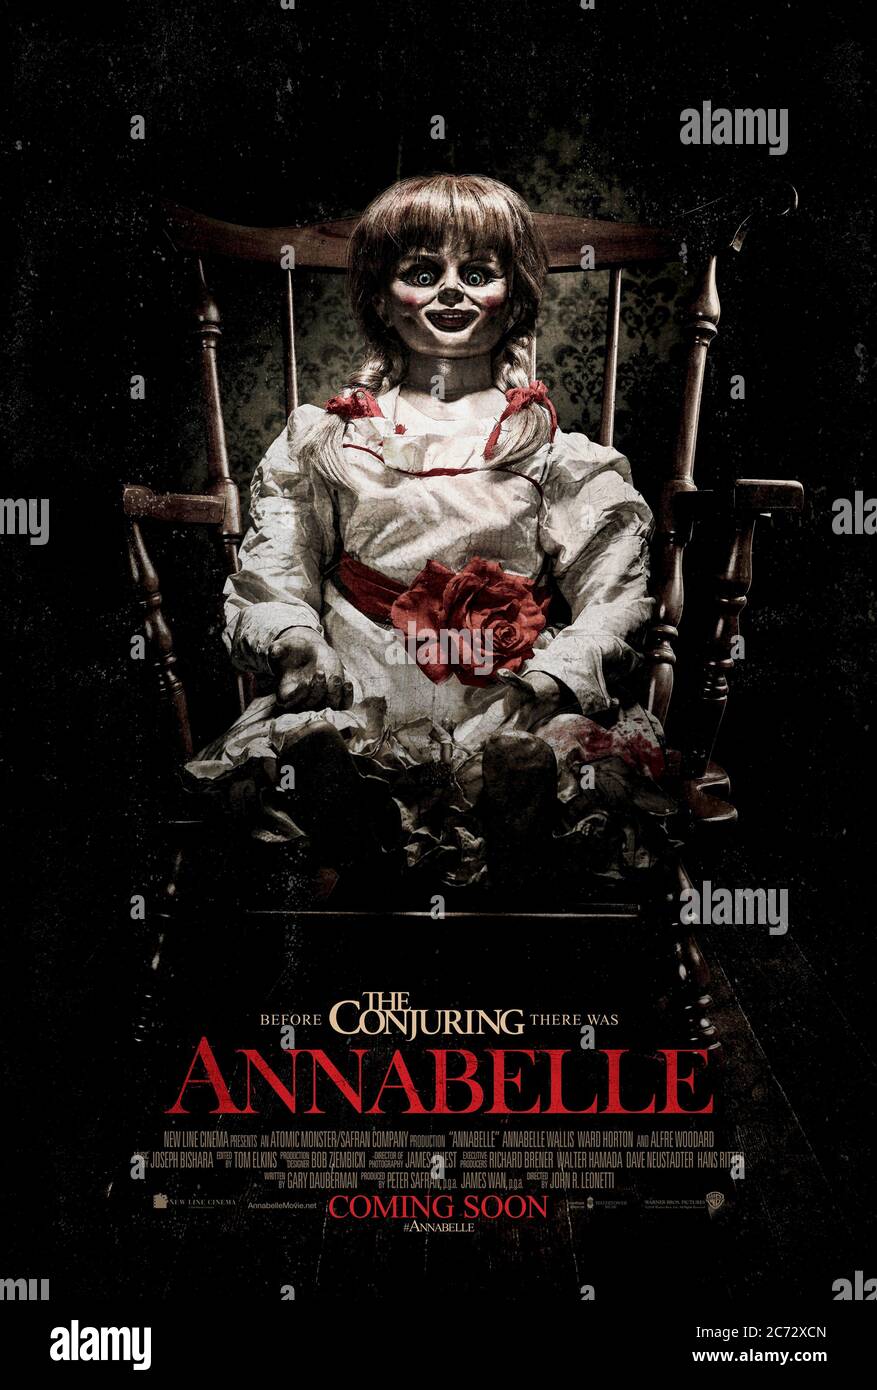 Annabelle (2014) directed by John R. Leonetti and starring Ward Horton, Annabelle Wallis, Alfre Woodard and Kerry O'Malley. A rare vintage doll becomes possessed with an evil presence in this prequel to The Conjuring. Stock Photo